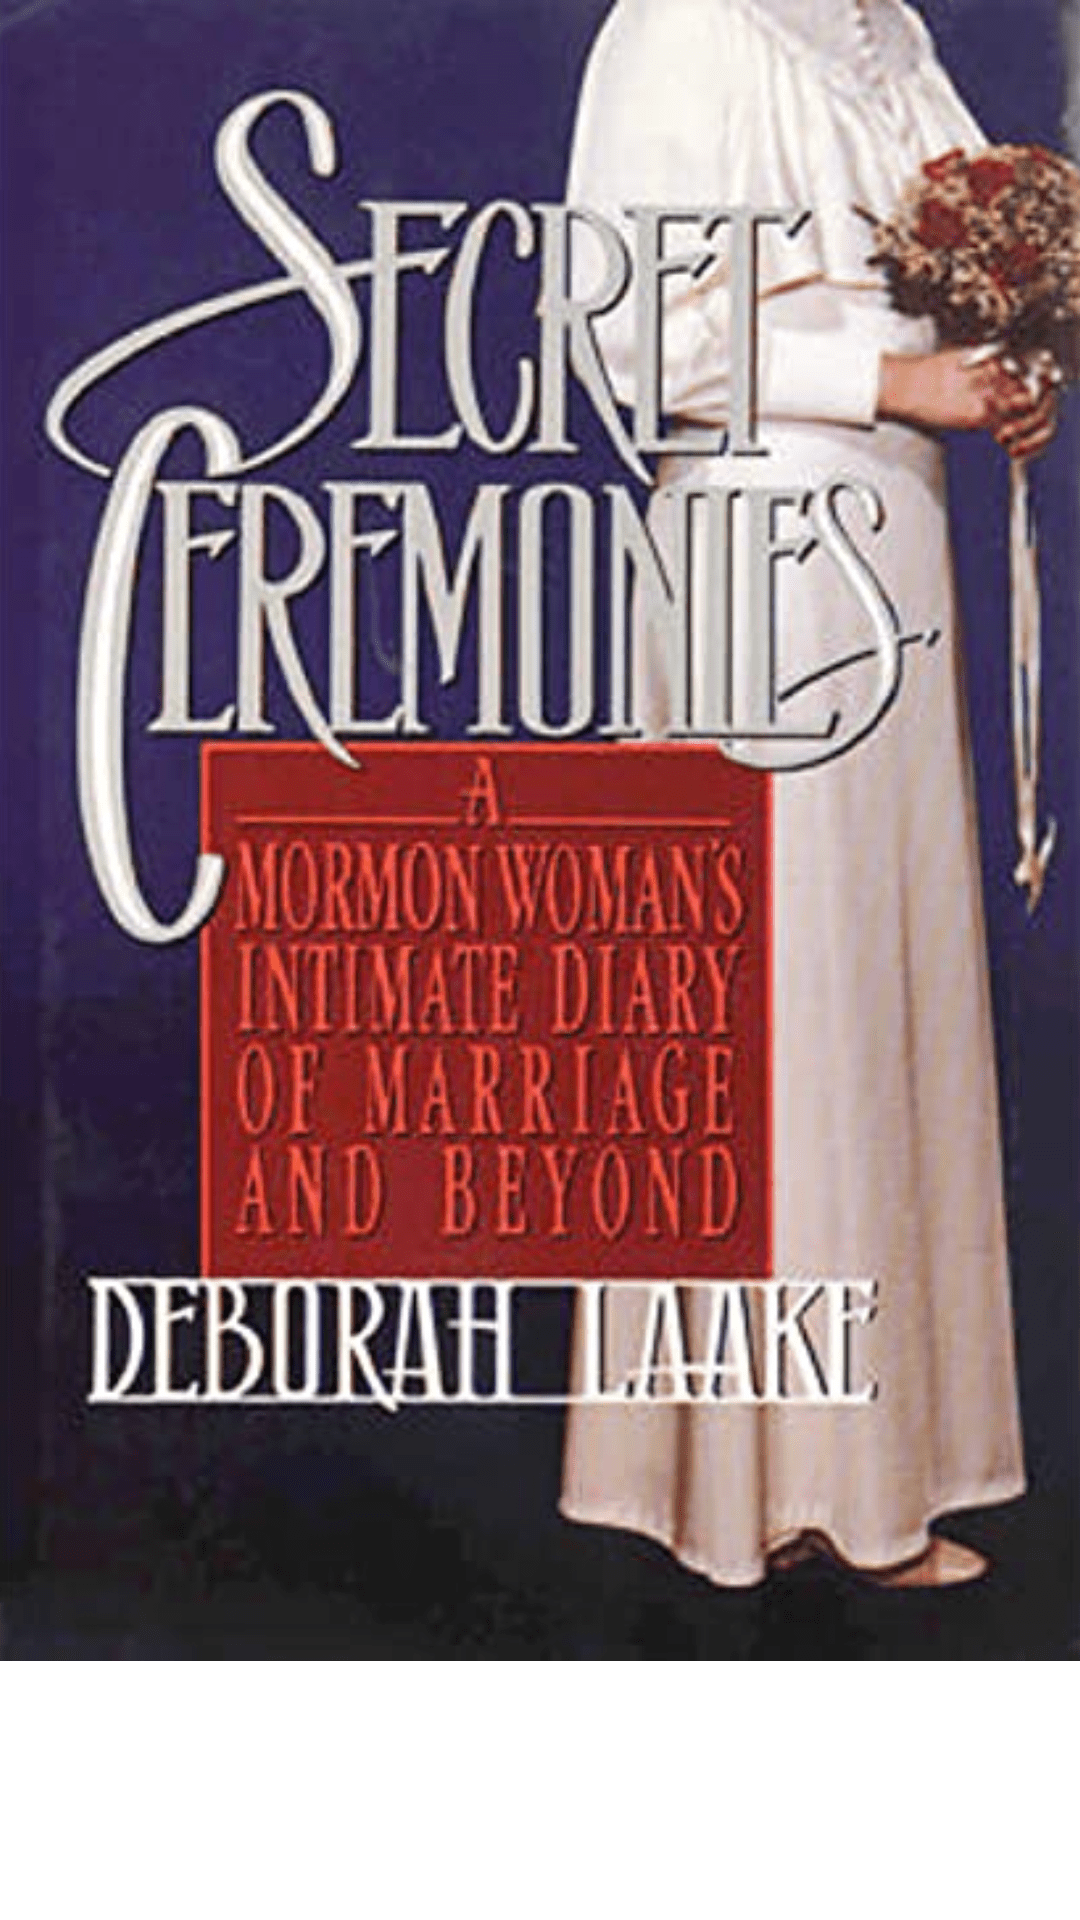 Secret Ceremonies : A Mormon Woman's Intimate Diary of Marriage and Beyond